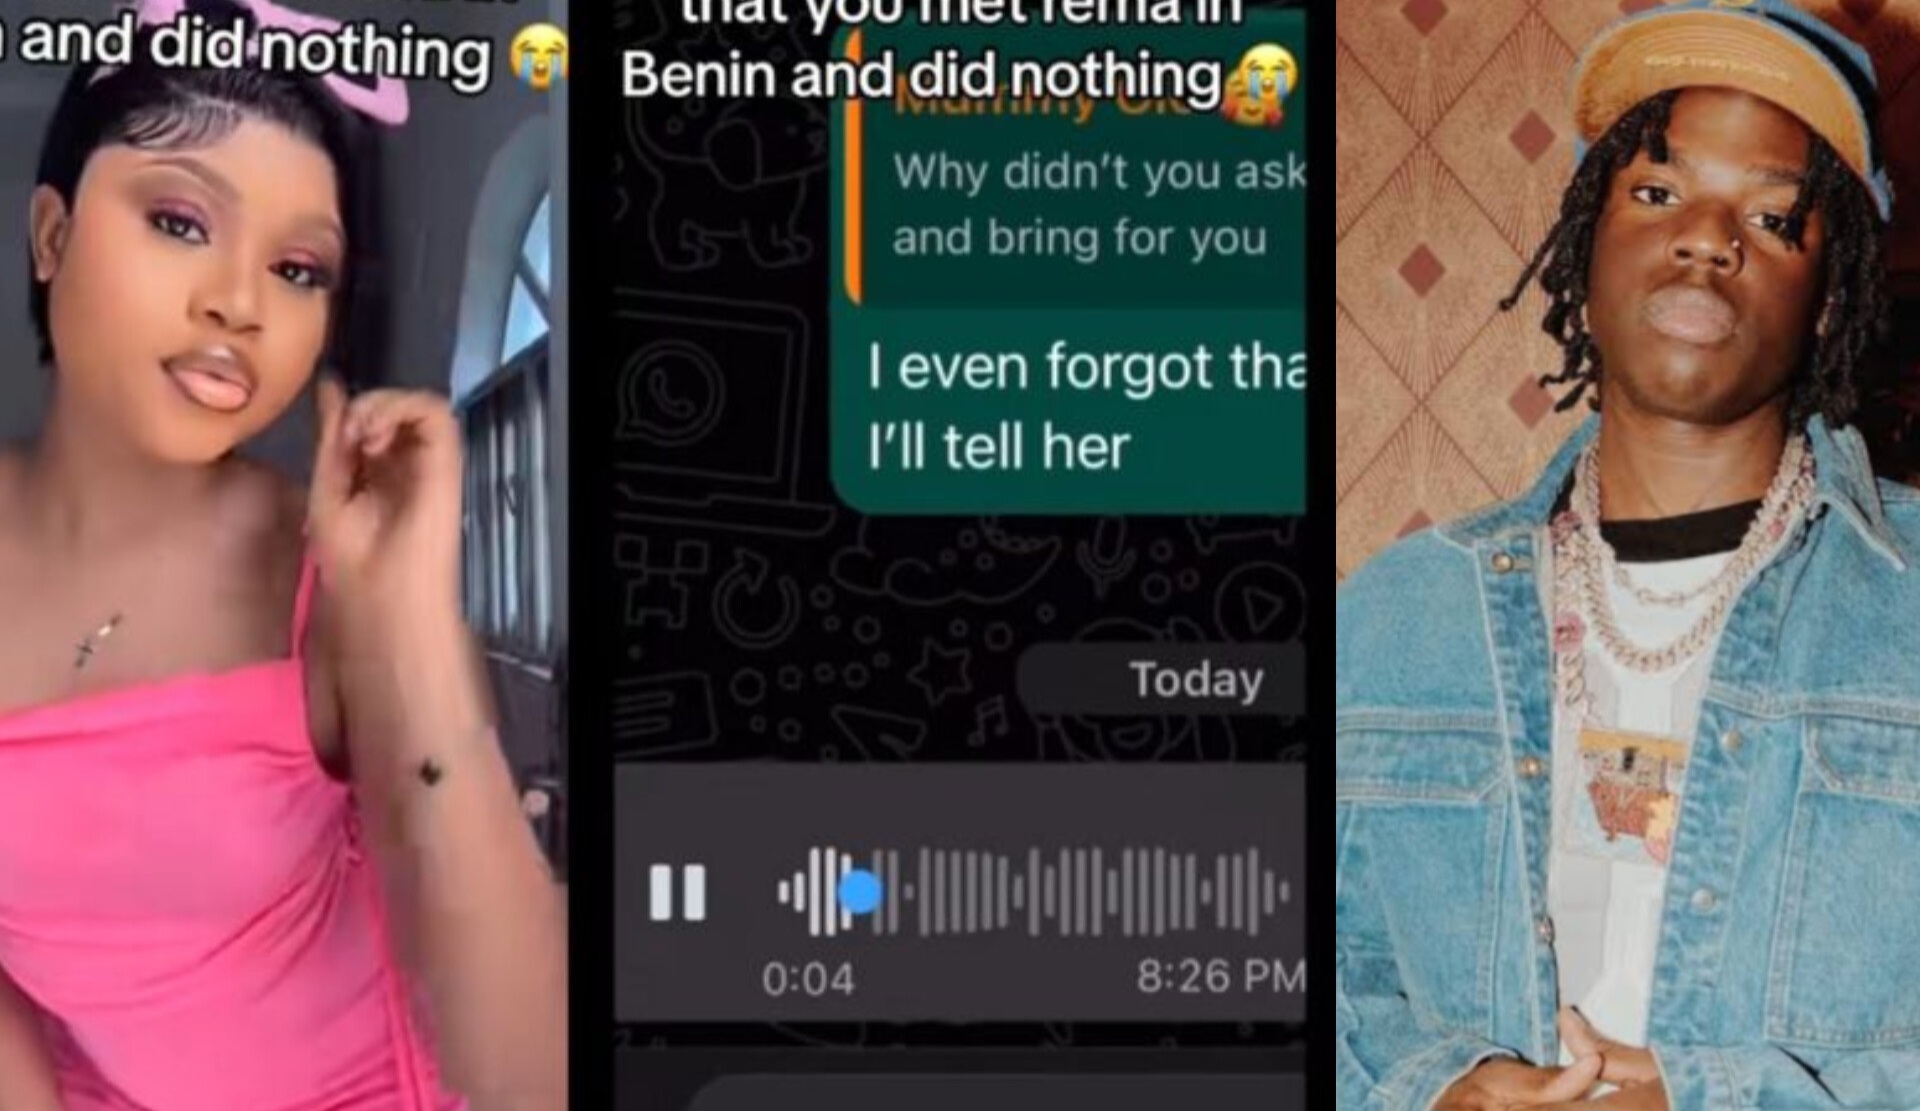 "I'm angry" - Mother scolds daughter for missing chance to become Rema's girlfriend or wife during his visit to Benin